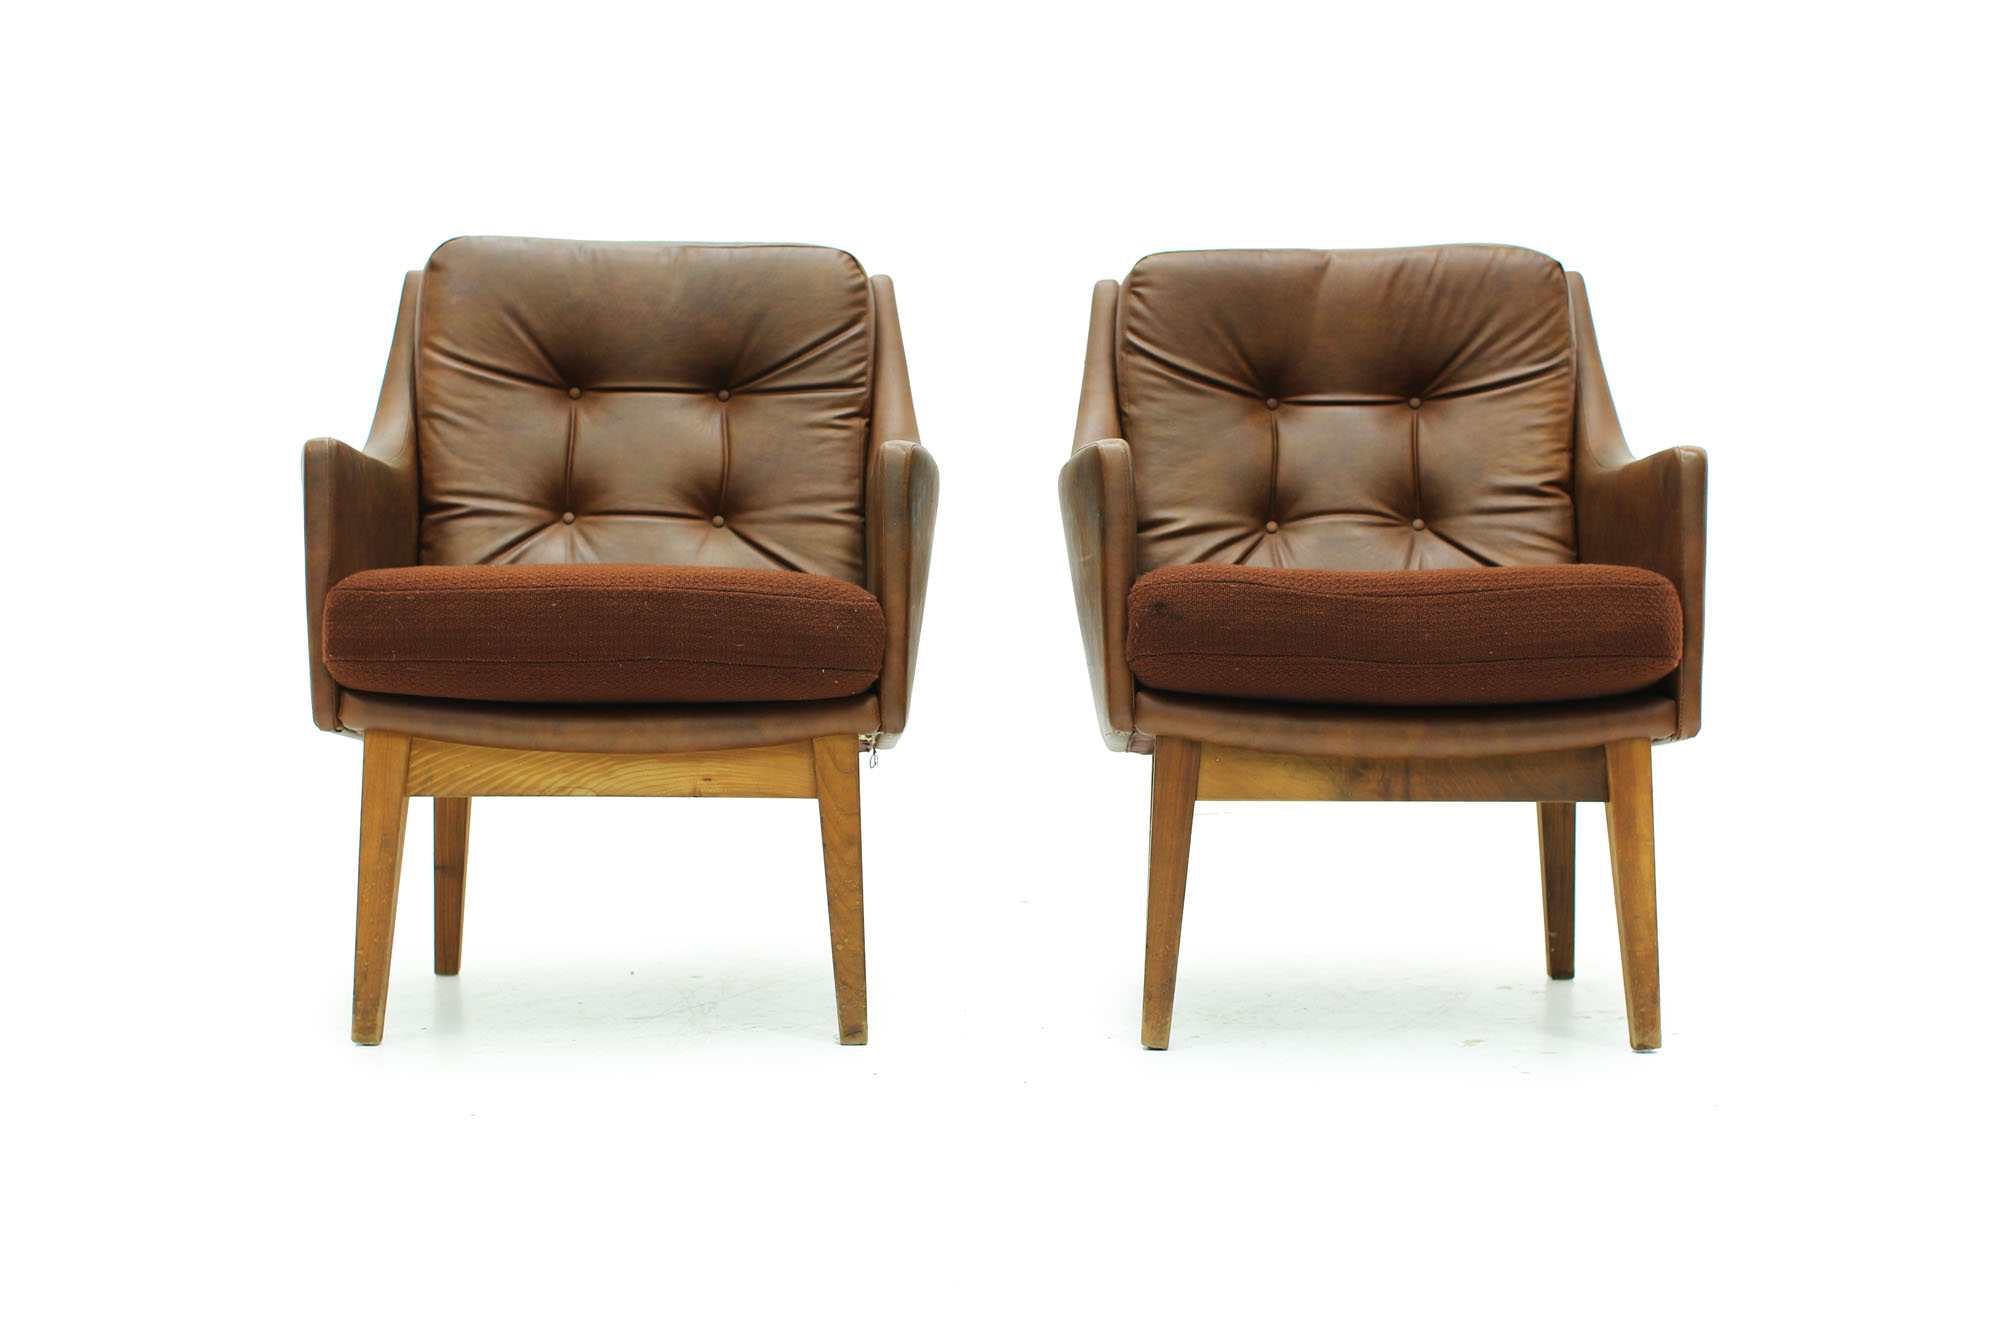 Set of tufted lounge chairs with original brown leatherette from the 60s (4).jpg